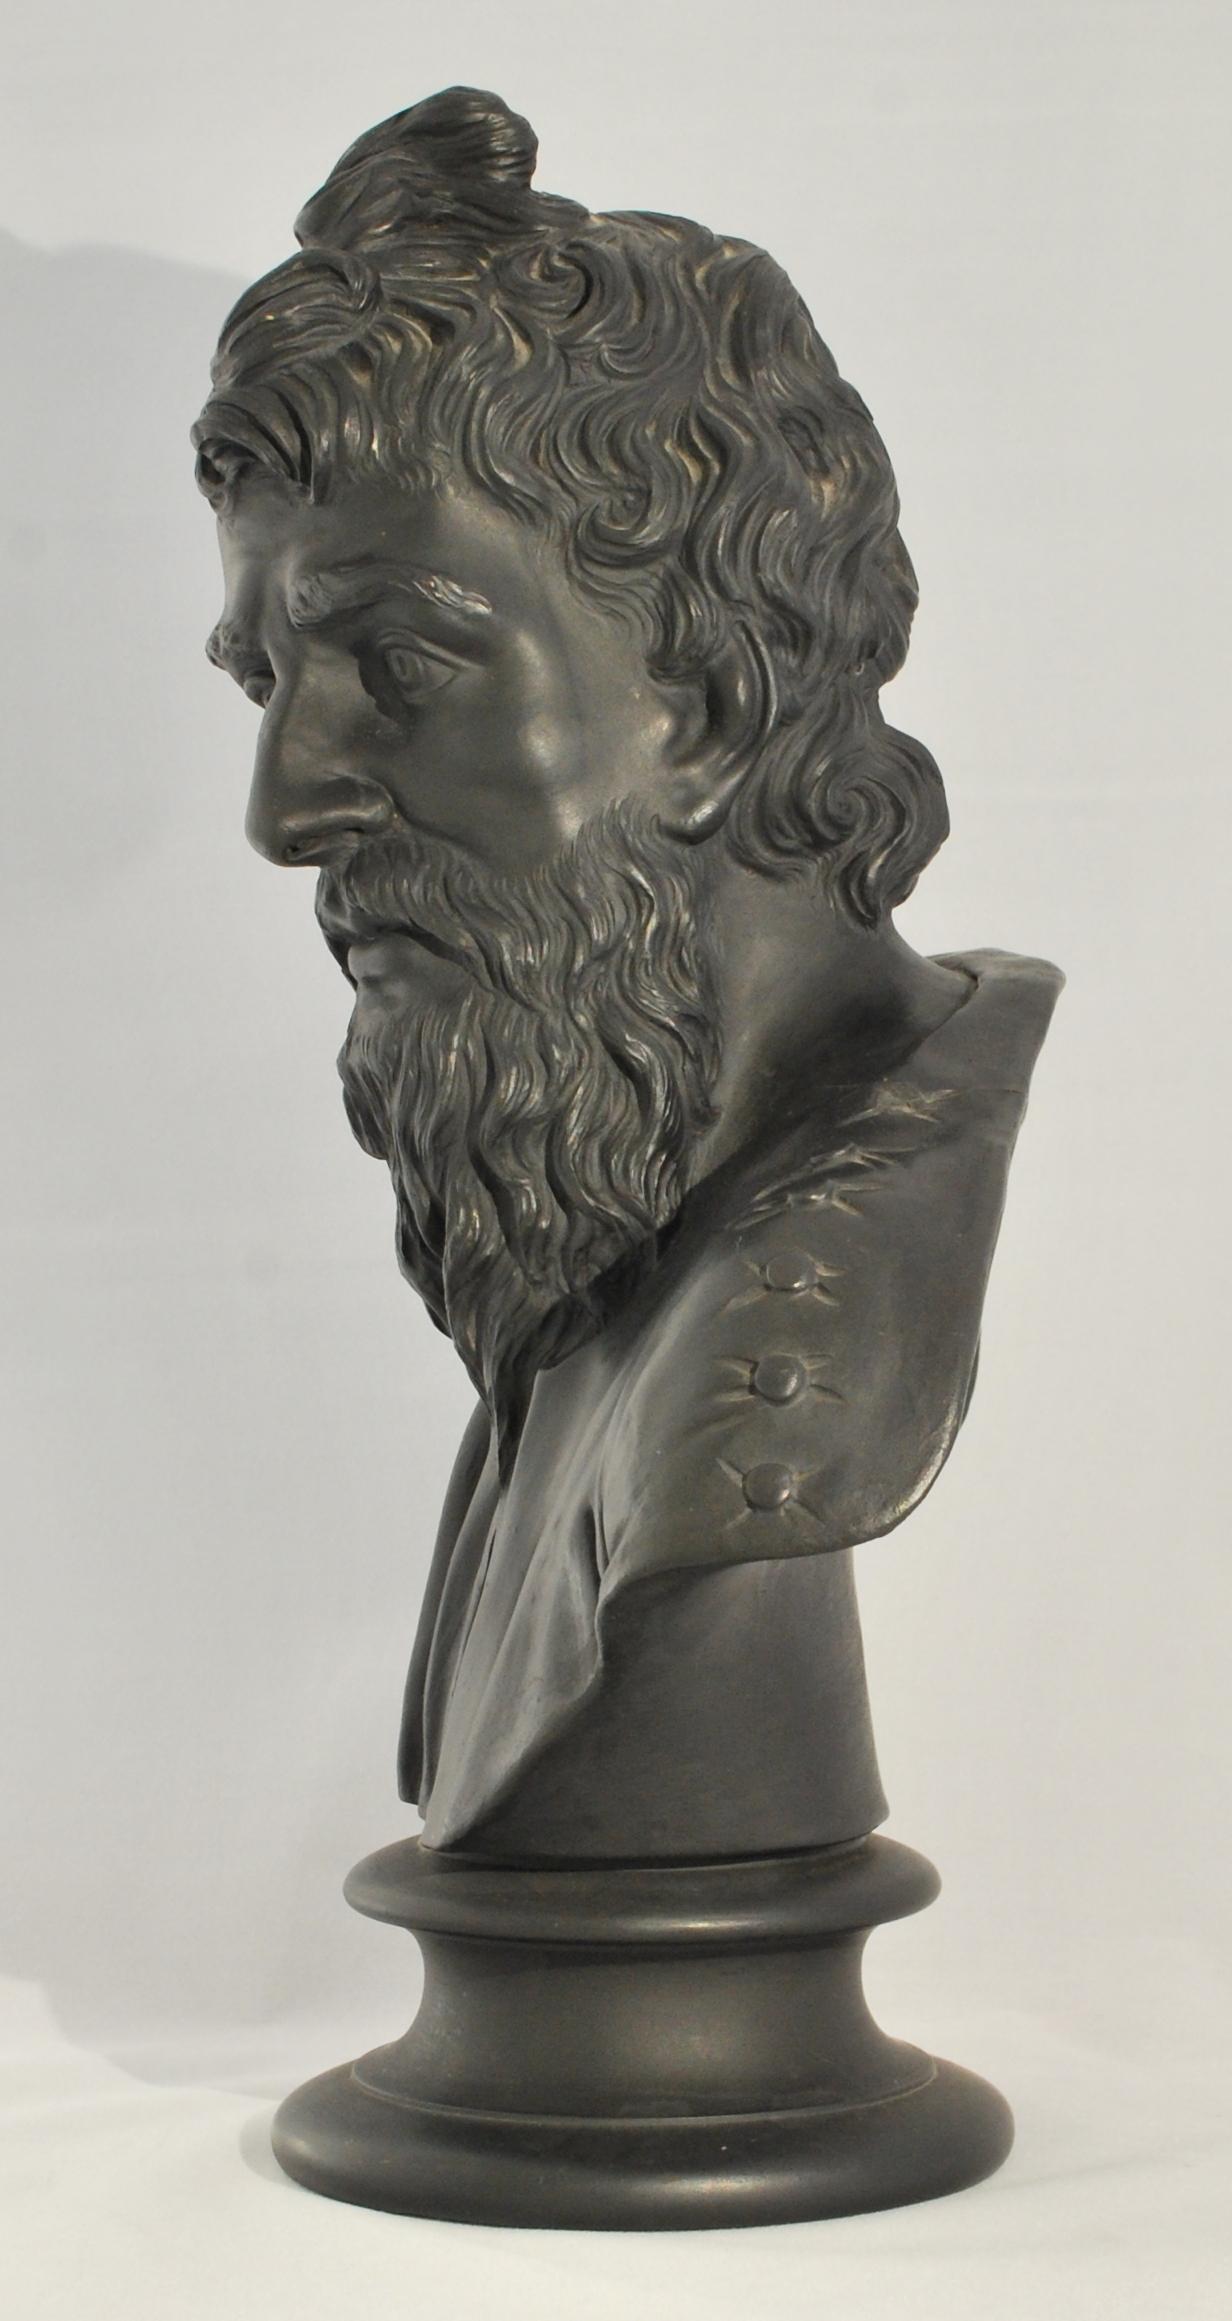 A fine, early bust of the eminent Greek philosopher. Wedgwood produced a large number of library busts in black basalt, which has an appearance similar to that of ancient bronze.